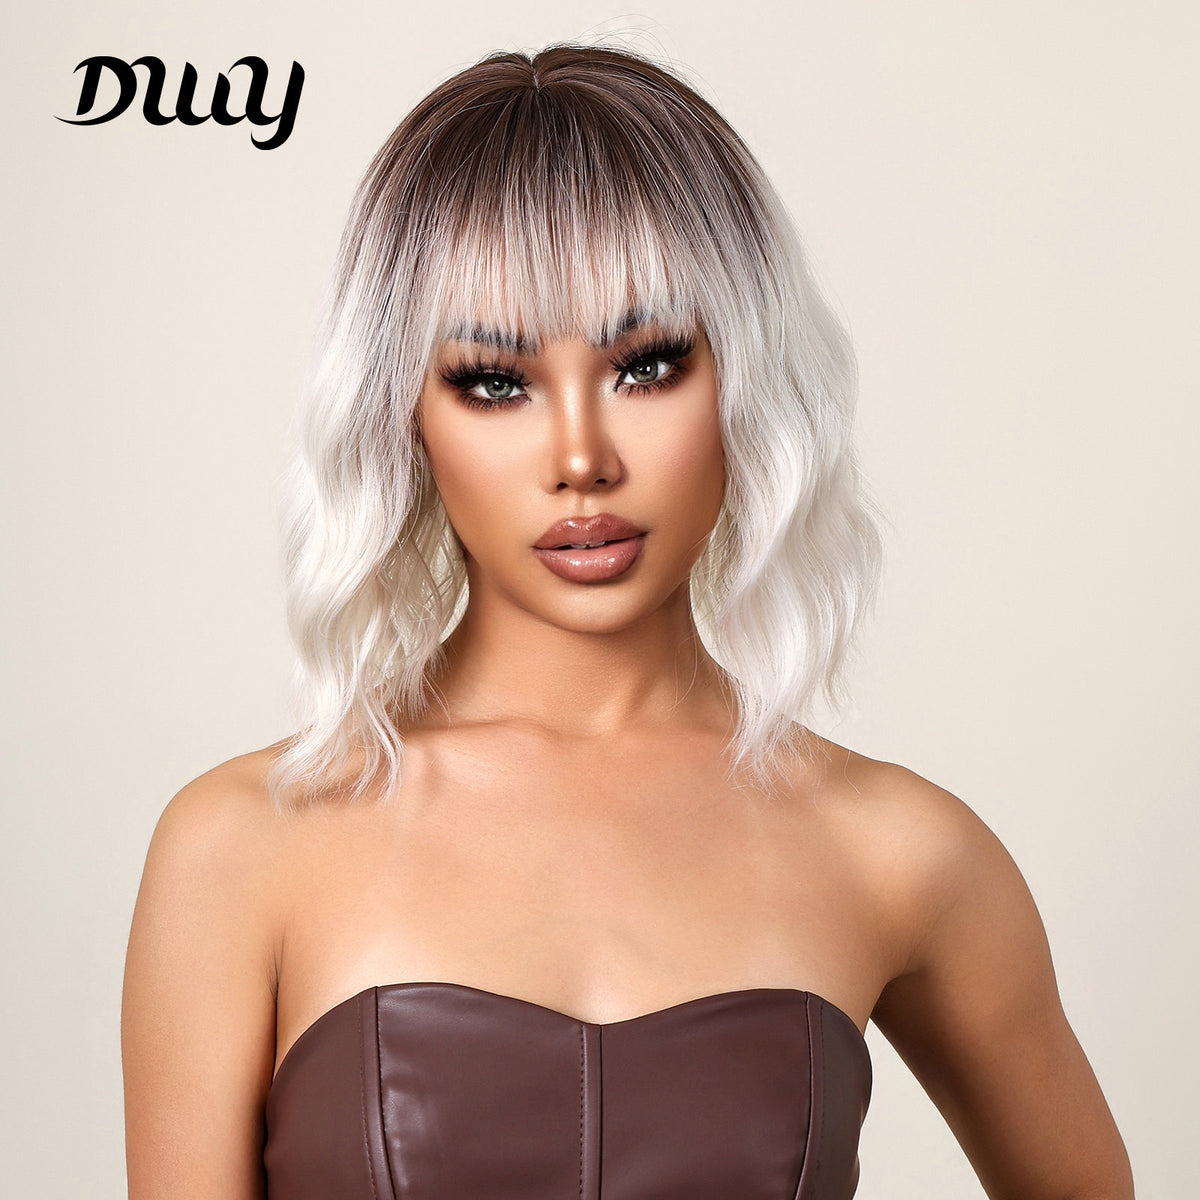 14 Inch Short Curly Black Ombre Silver Wig Synthetic Wig Women's Wig  or Cosplay Use WL1077-2